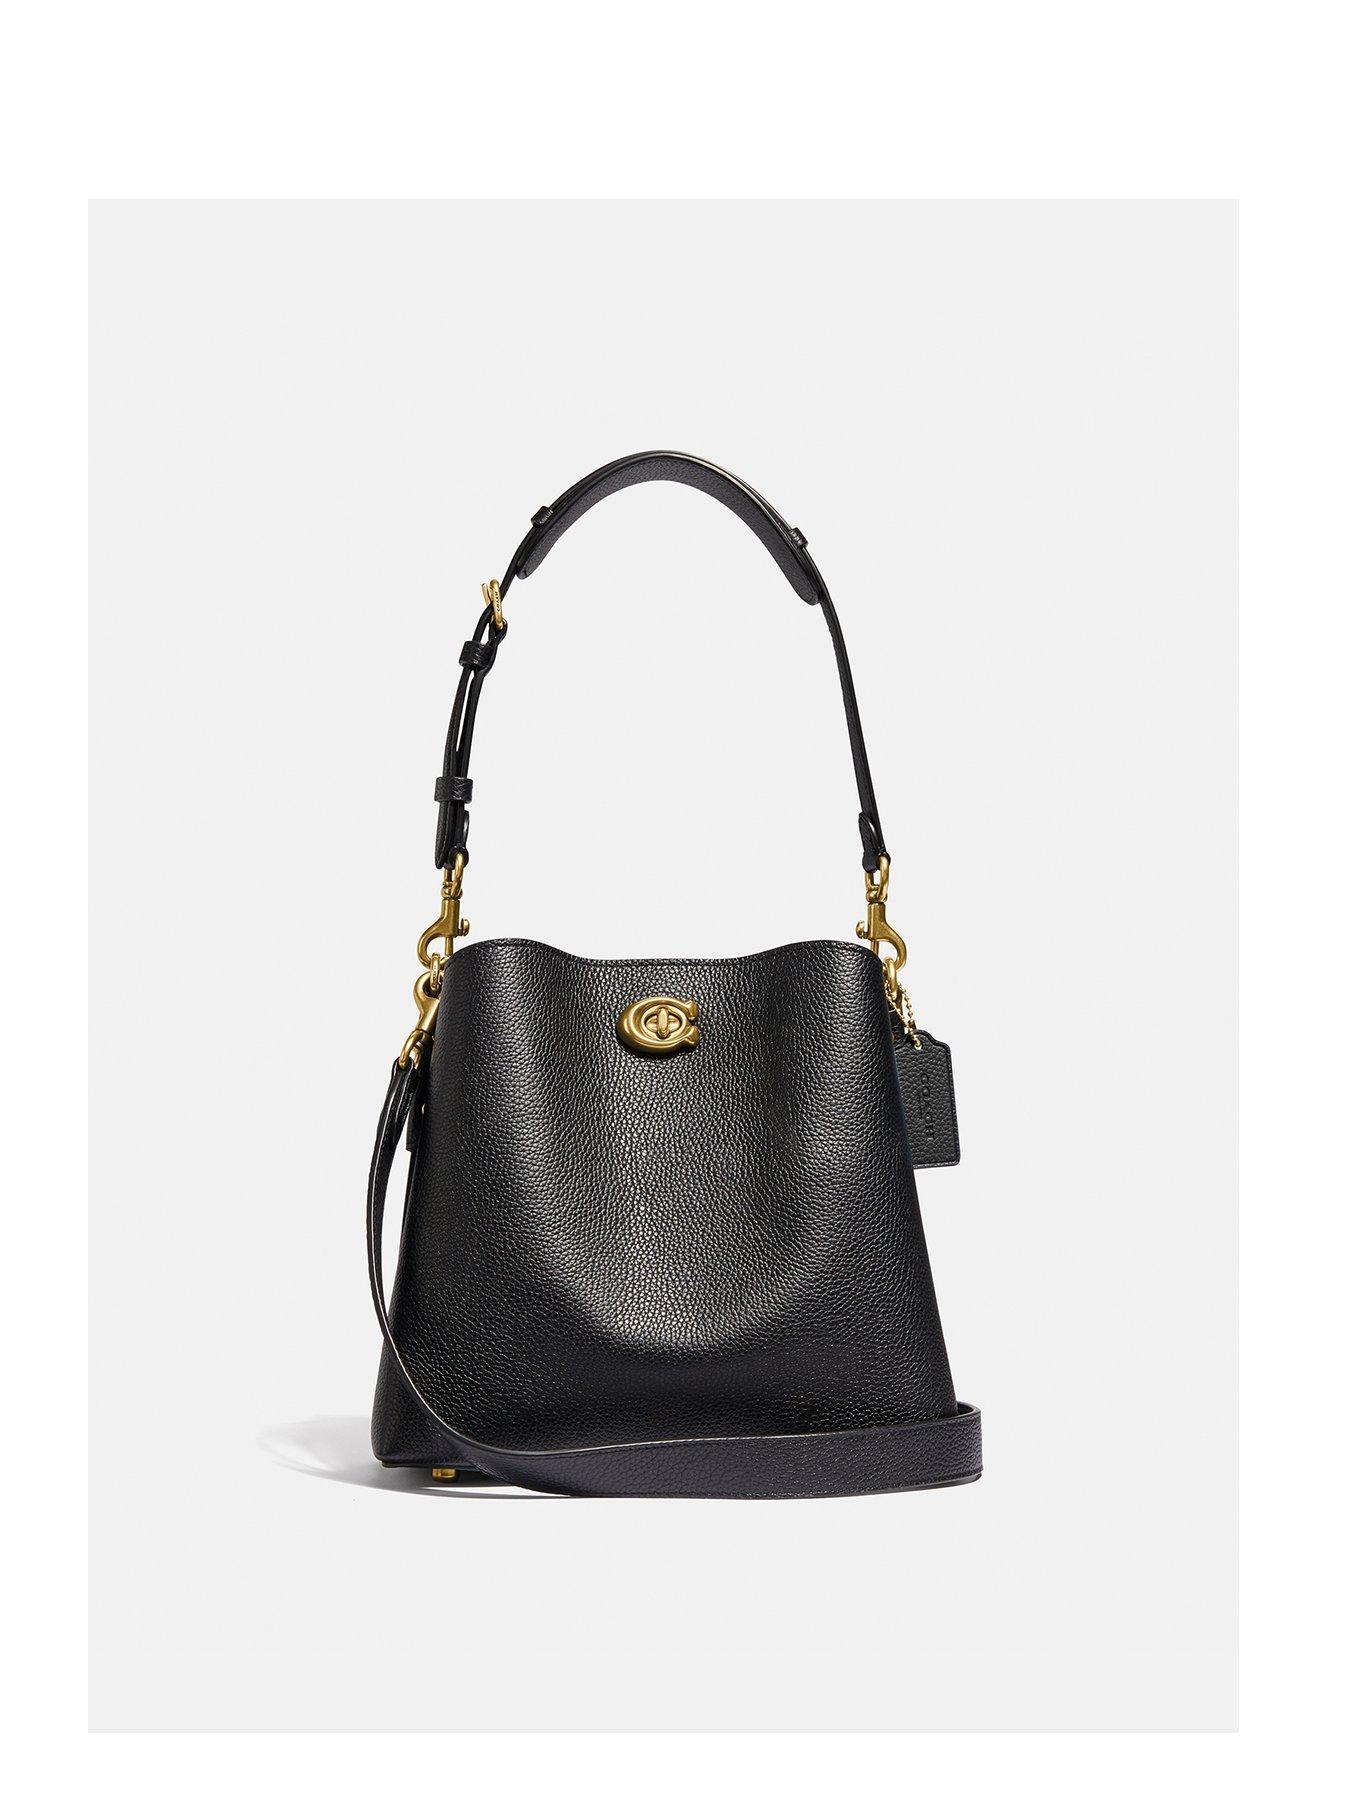 Coach Willow Pebble Leather Tote